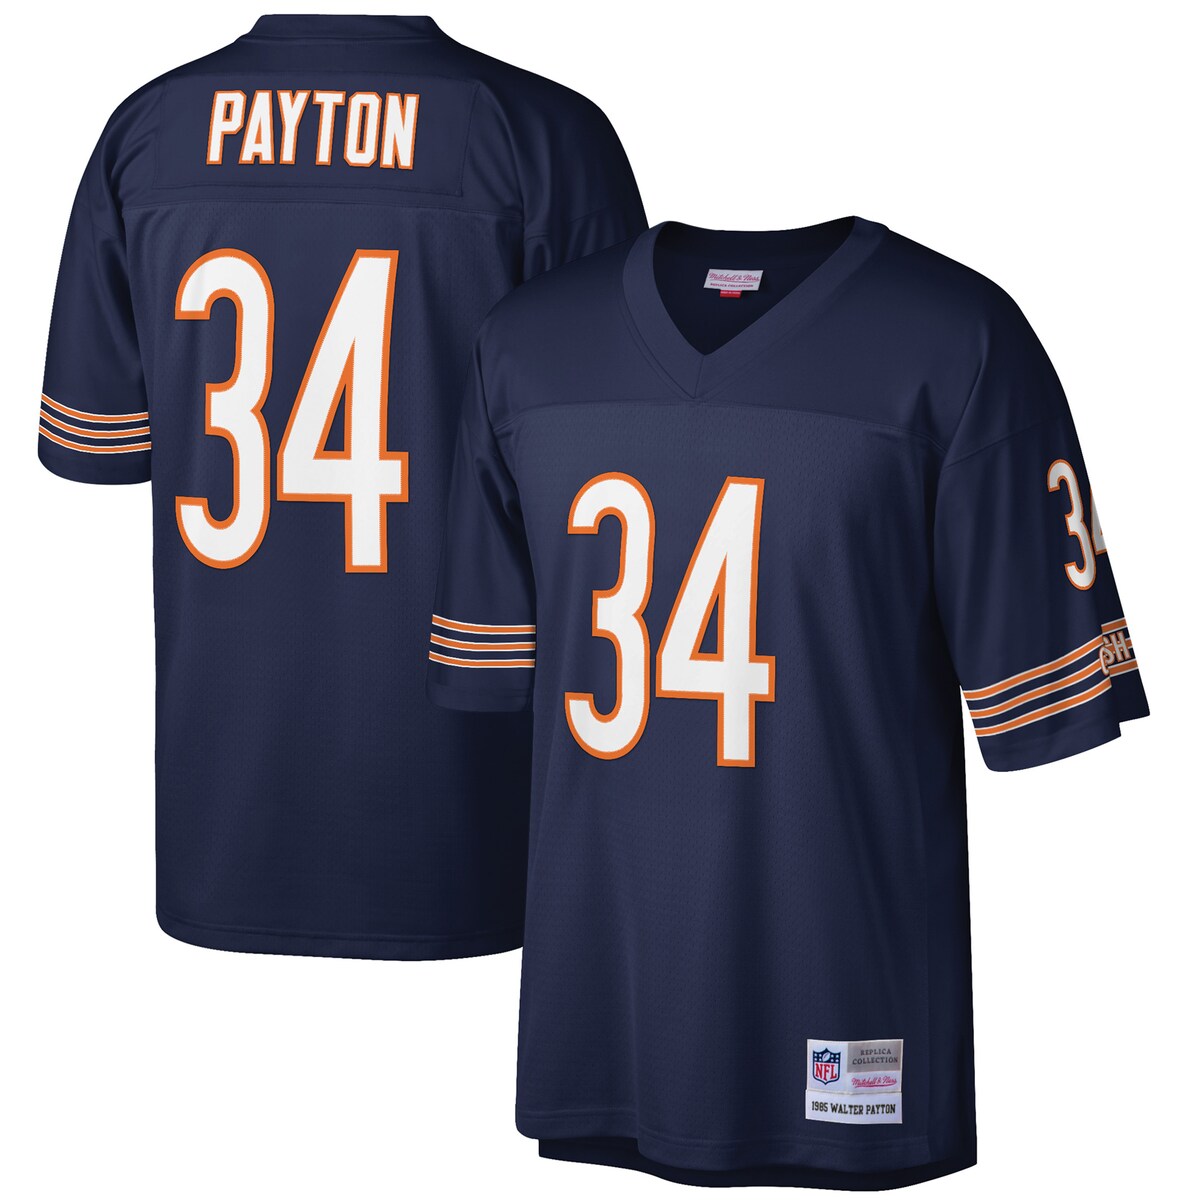 Wear your enthusiasm for the Chicago Bears proudly when you get this Walter Payton 1985 Retired Player replica jersey from Mitchell & Ness.Front and back yoke seamsV-neckWoven jock tagTackle twill appliqueShort sleeveSide splits at bottom hemMaterial: 100% PolyesterMachine wash, tumble dry lowJersey Color Style: RetiredOfficially licensedReplica JerseyFabric appliqueScreen print graphicsRib-knit collarMesh bodiceBack neck tapeDroptail hemImportedBrand: Mitchell & Ness